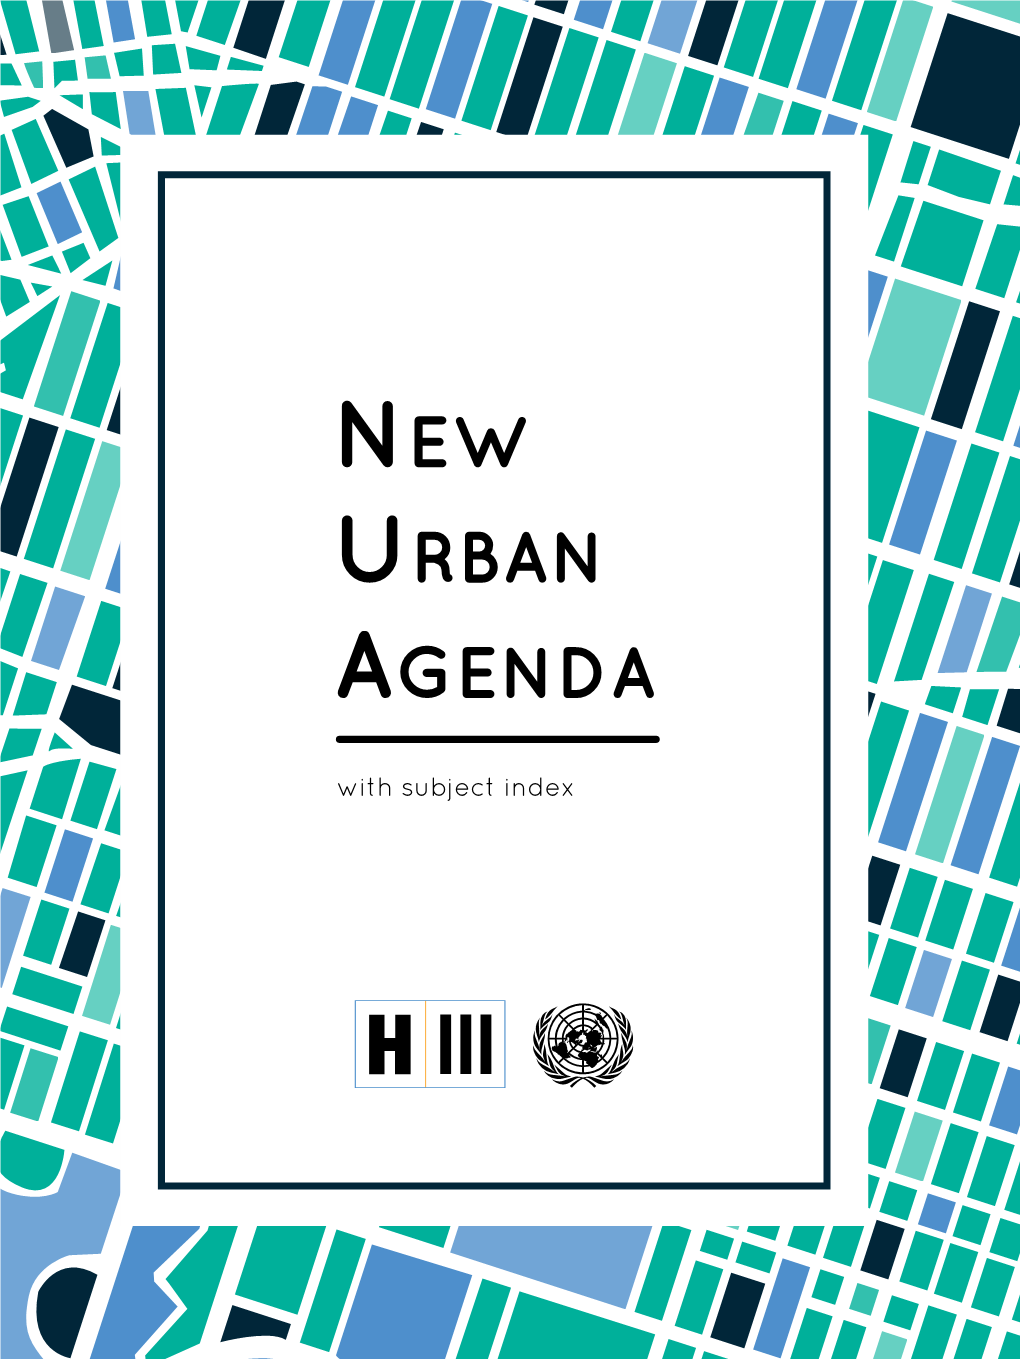 NEW URBAN AGENDA with Subject Index © 2017 United Nations